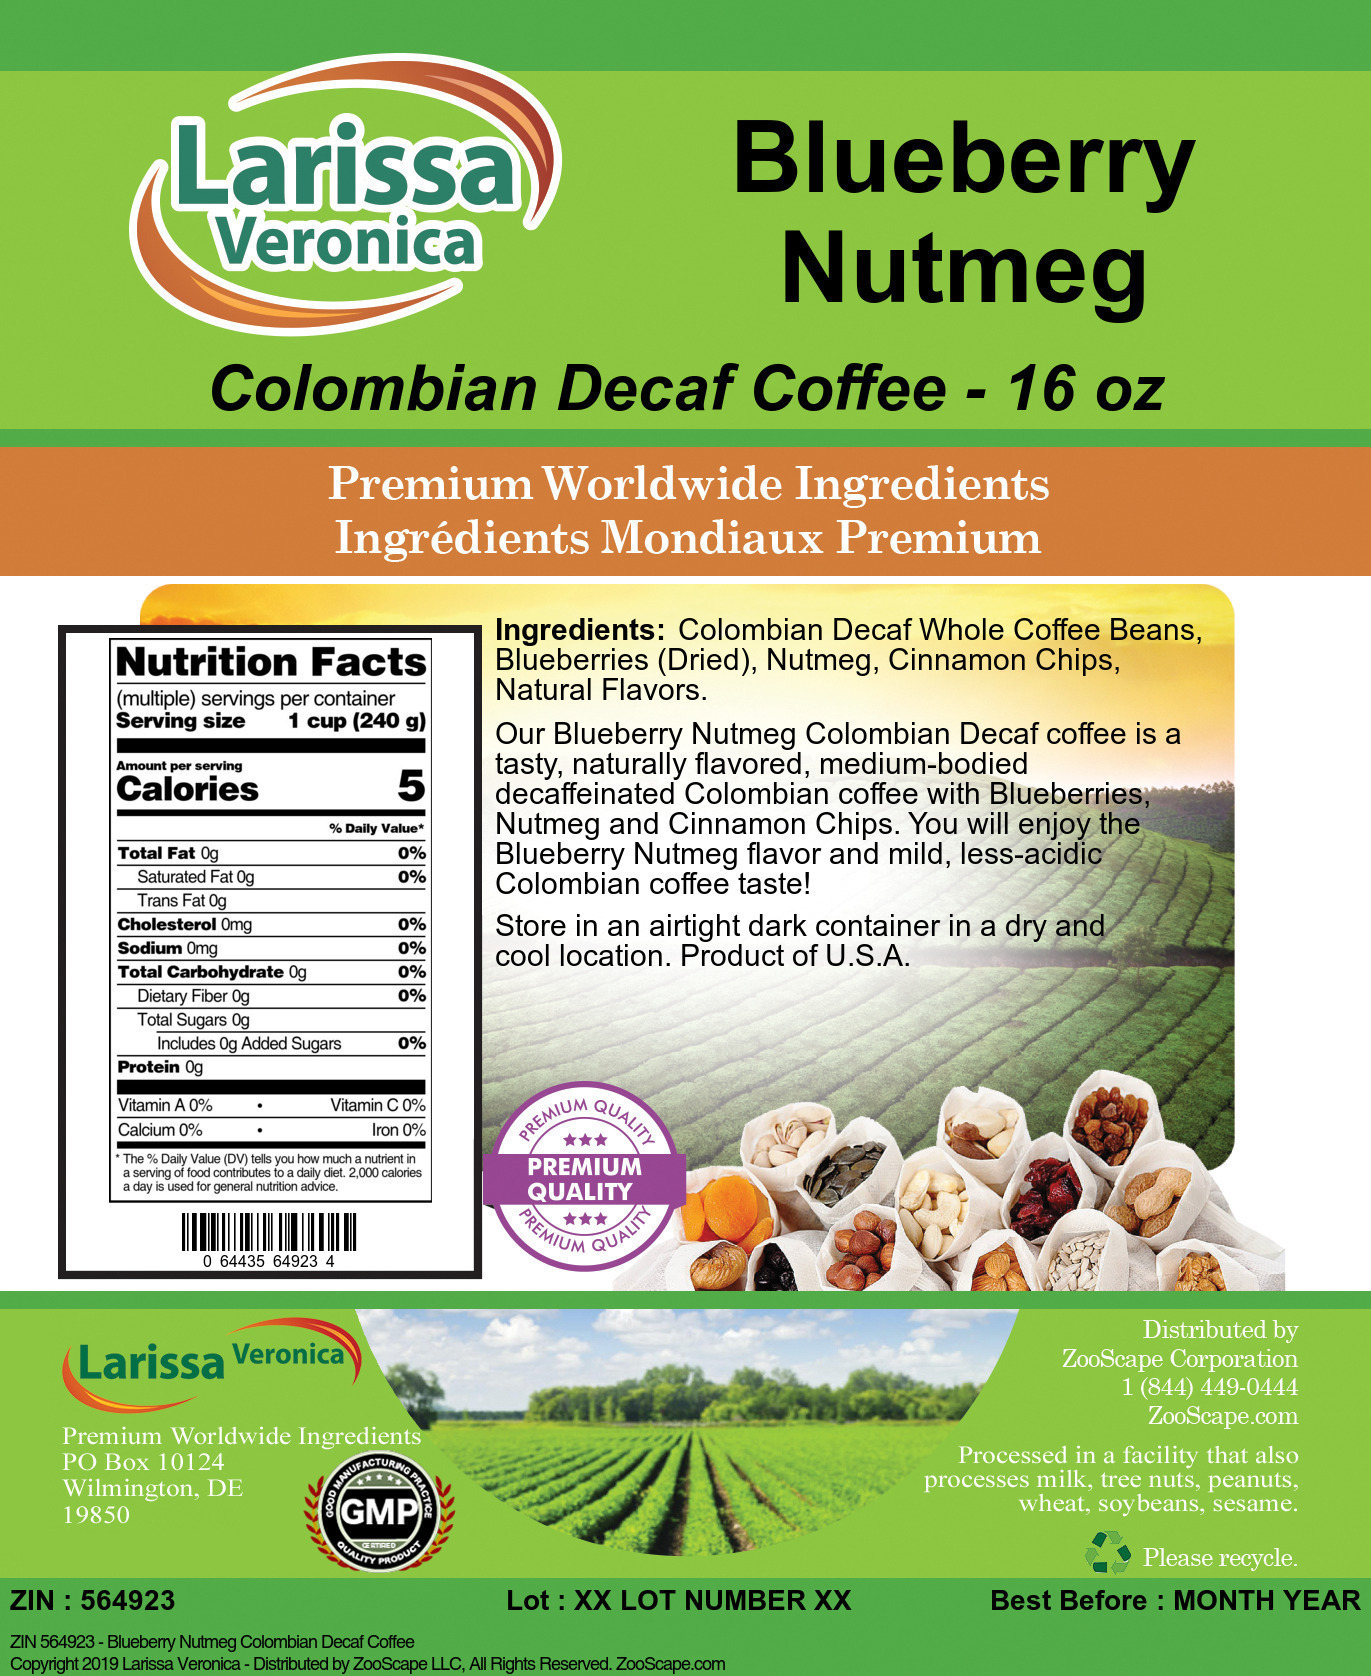 Blueberry Nutmeg Colombian Decaf Coffee - Label